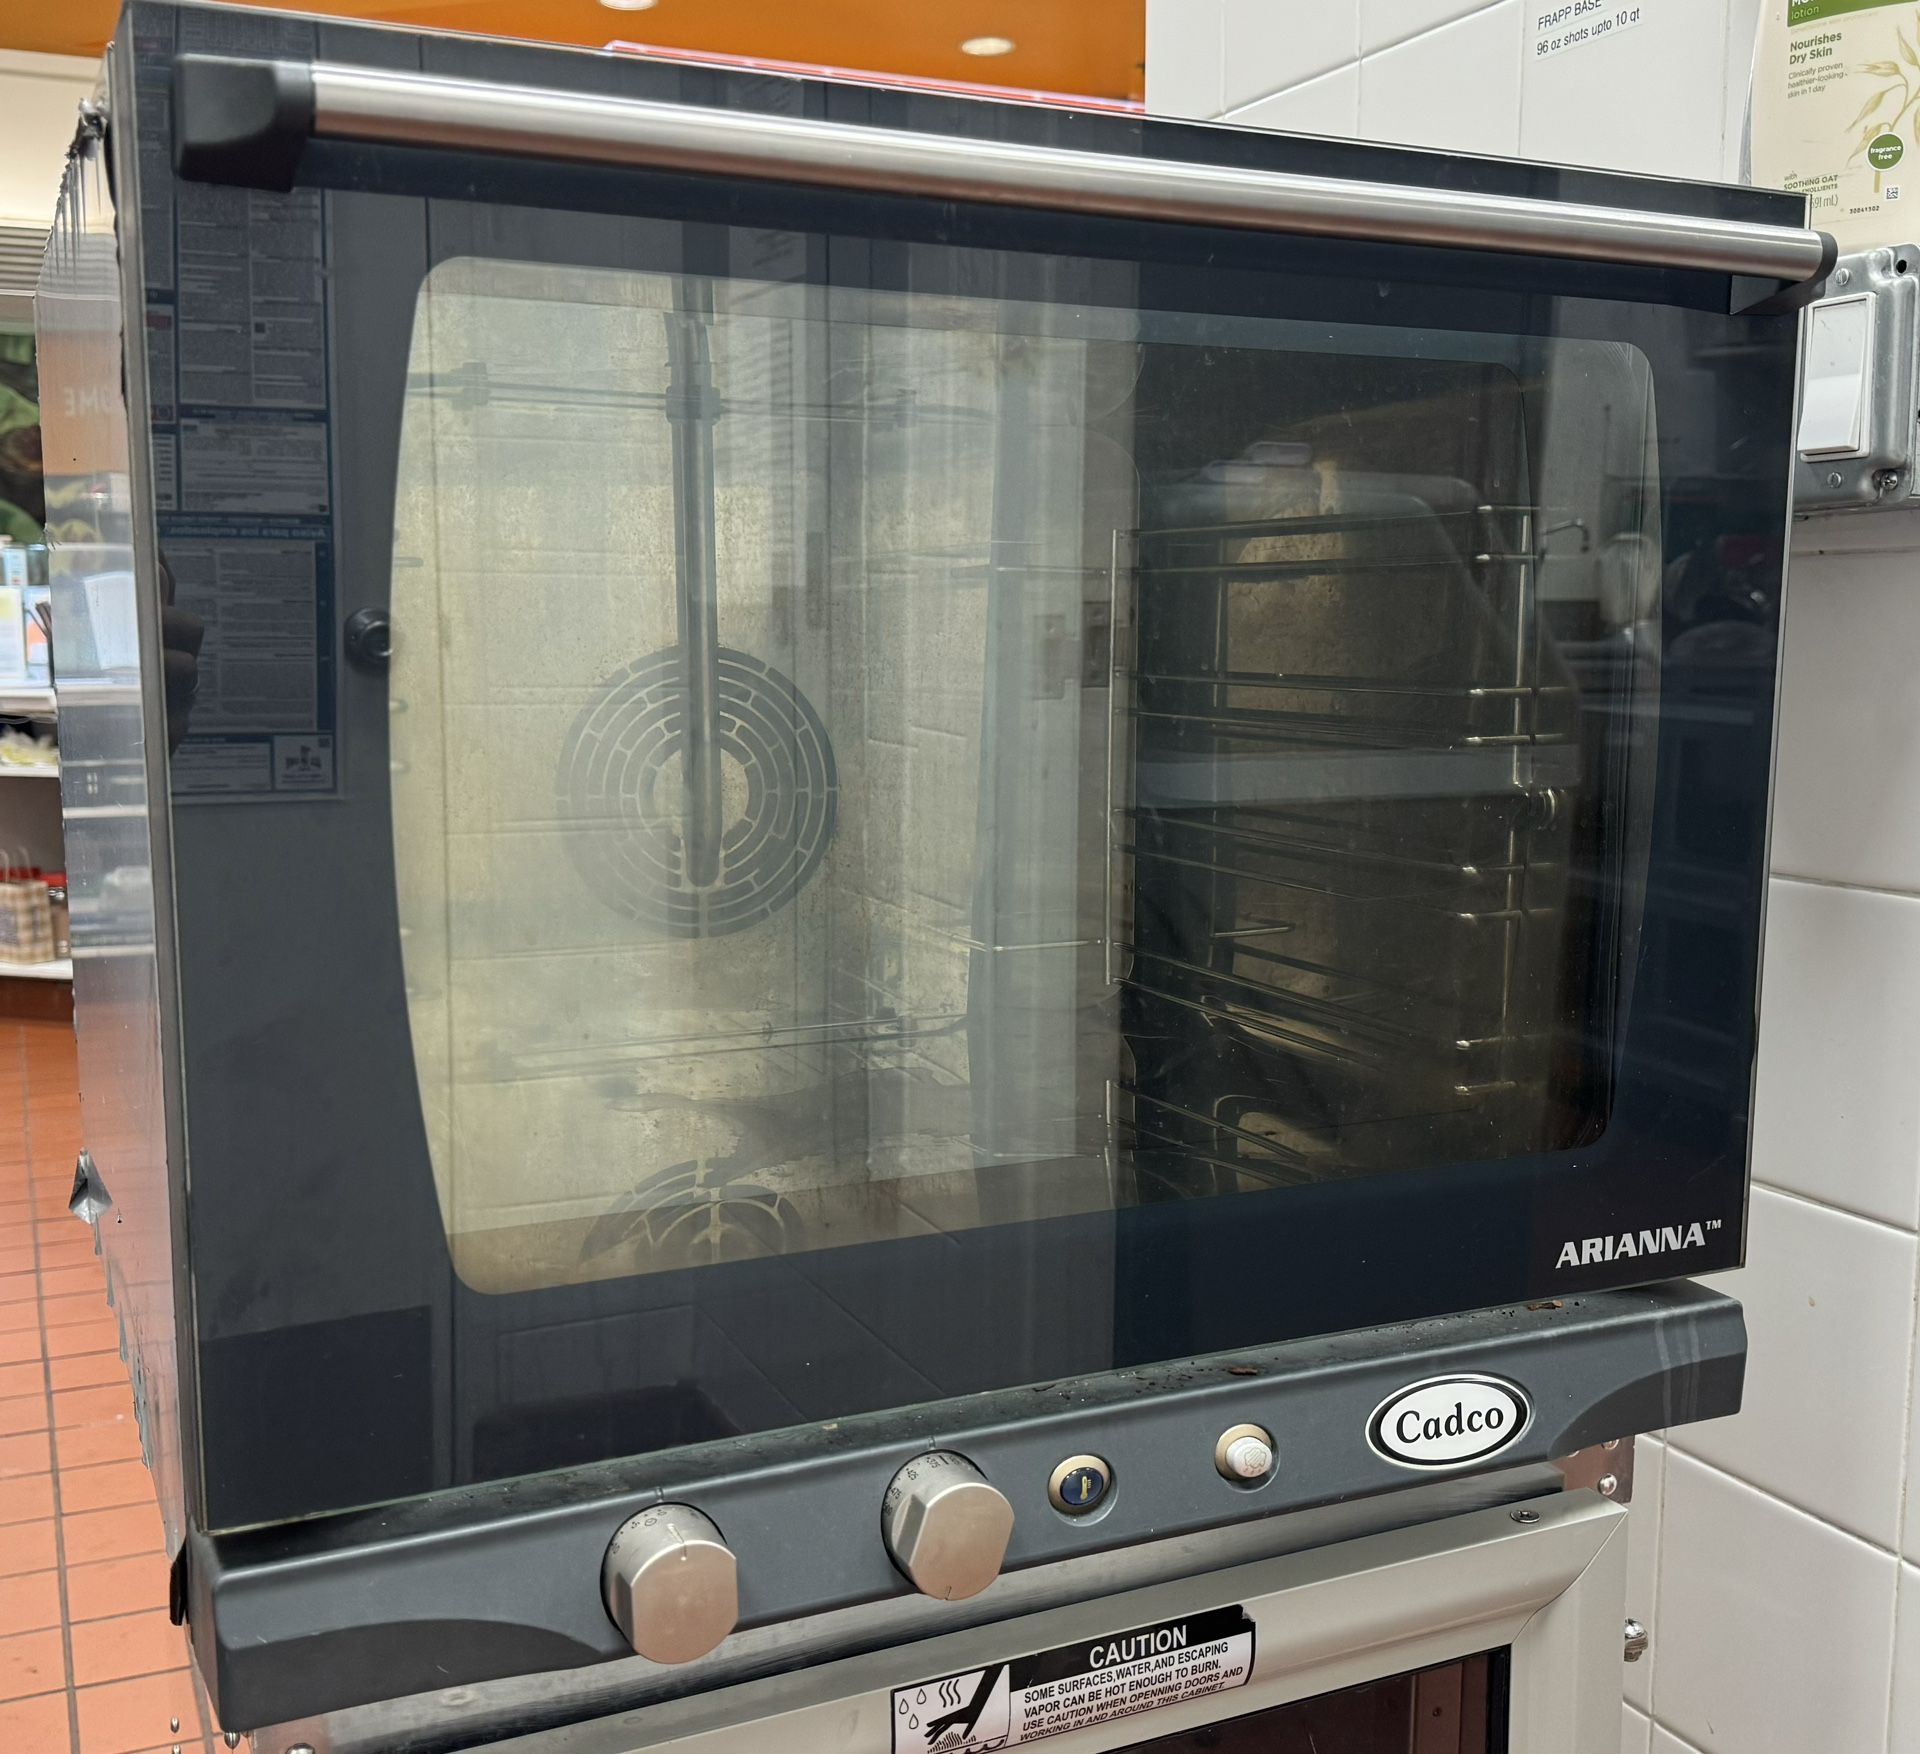 Commercial Electric Oven Used